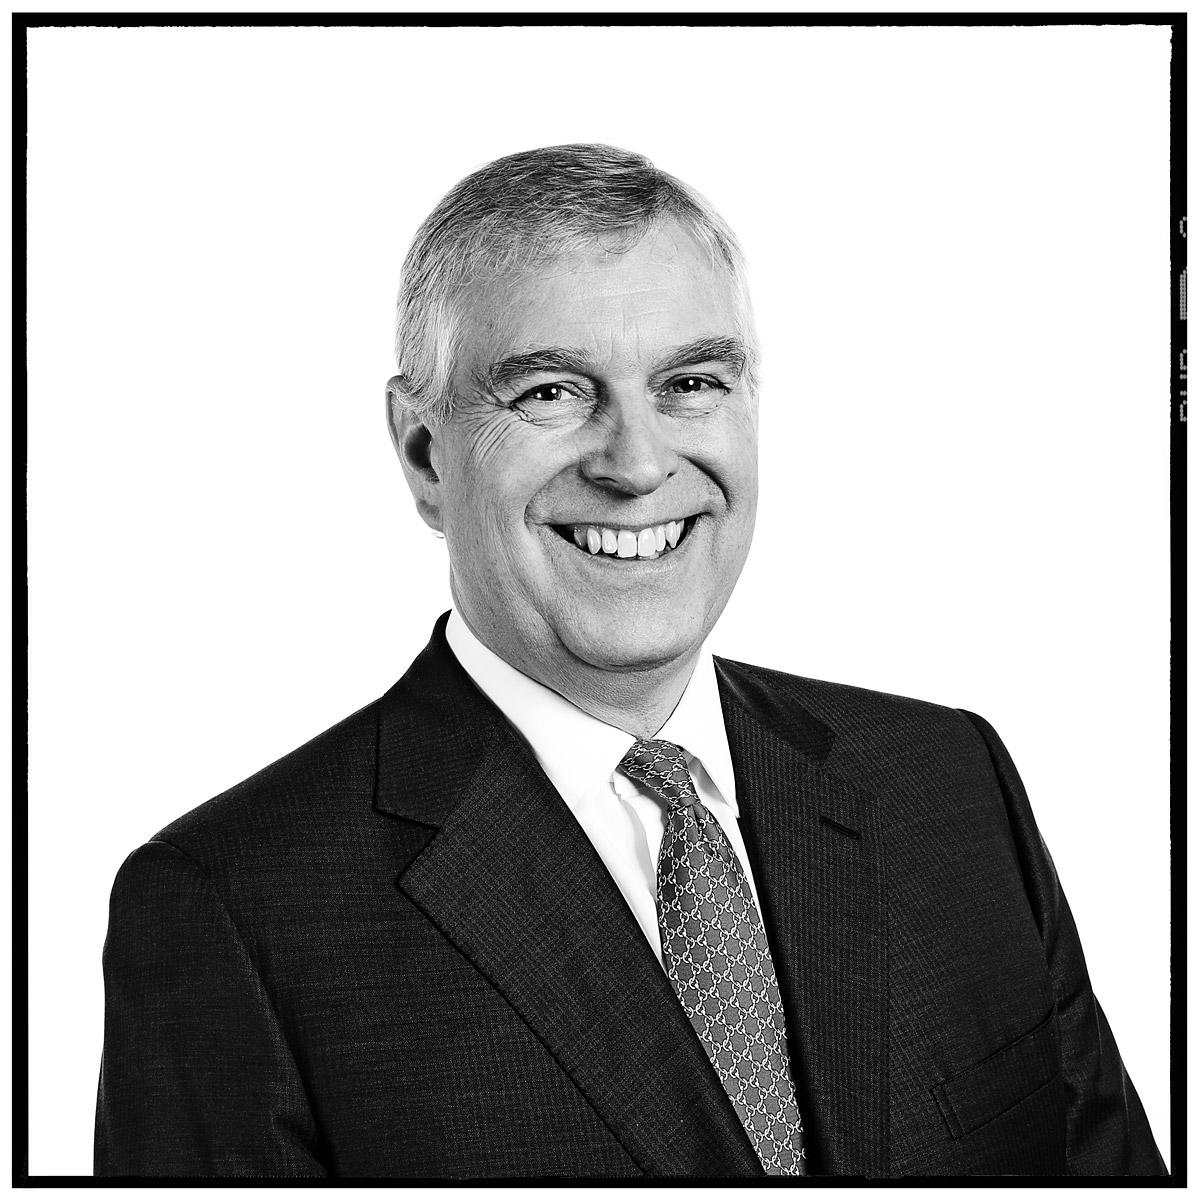 Portrait of HRH Prince Andrew by Contemporary London photographer Julian Hanford